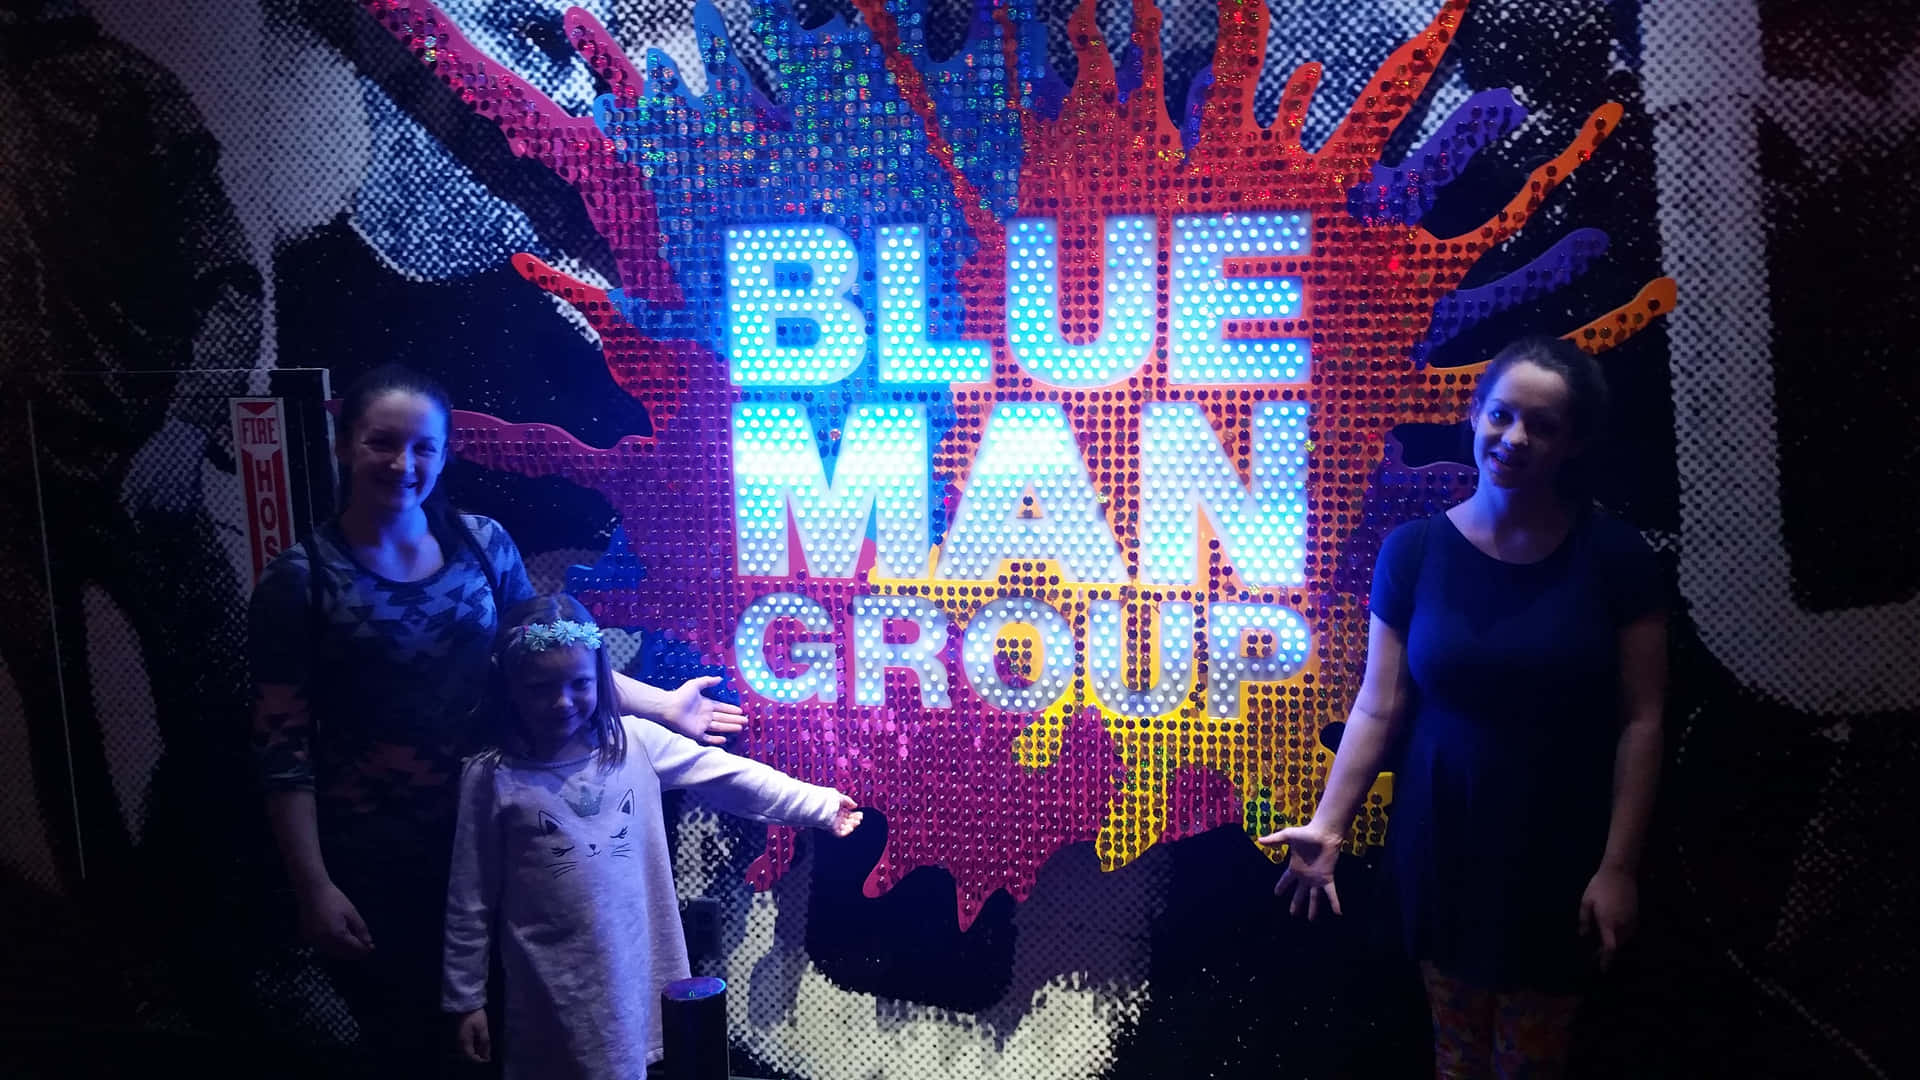 Witness the Spectacle, Experience the Magic of Blue Man Group! Wallpaper